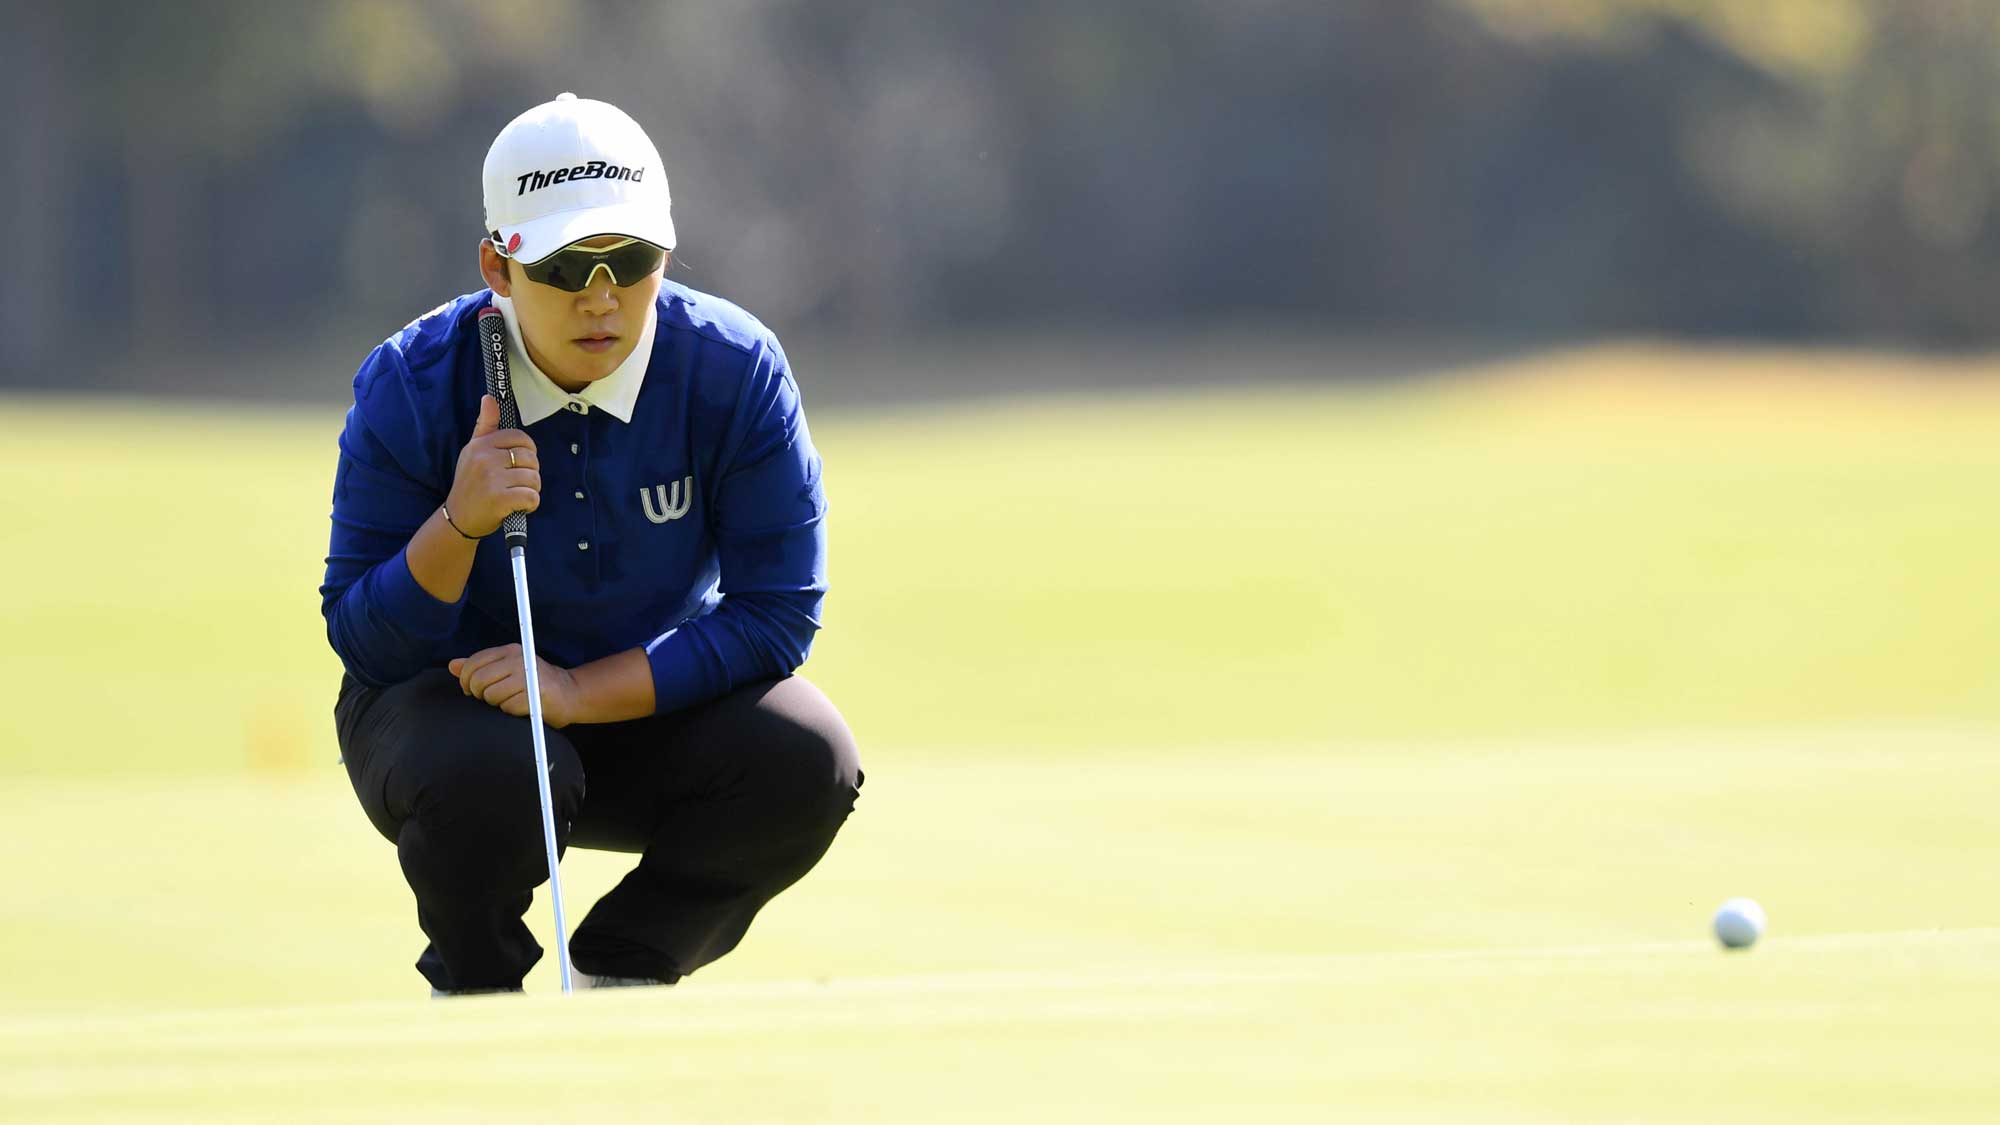 Jiyai Shin of South Korea lines up her putt on the 6th hole during the final round of the TOTO Japan Classic